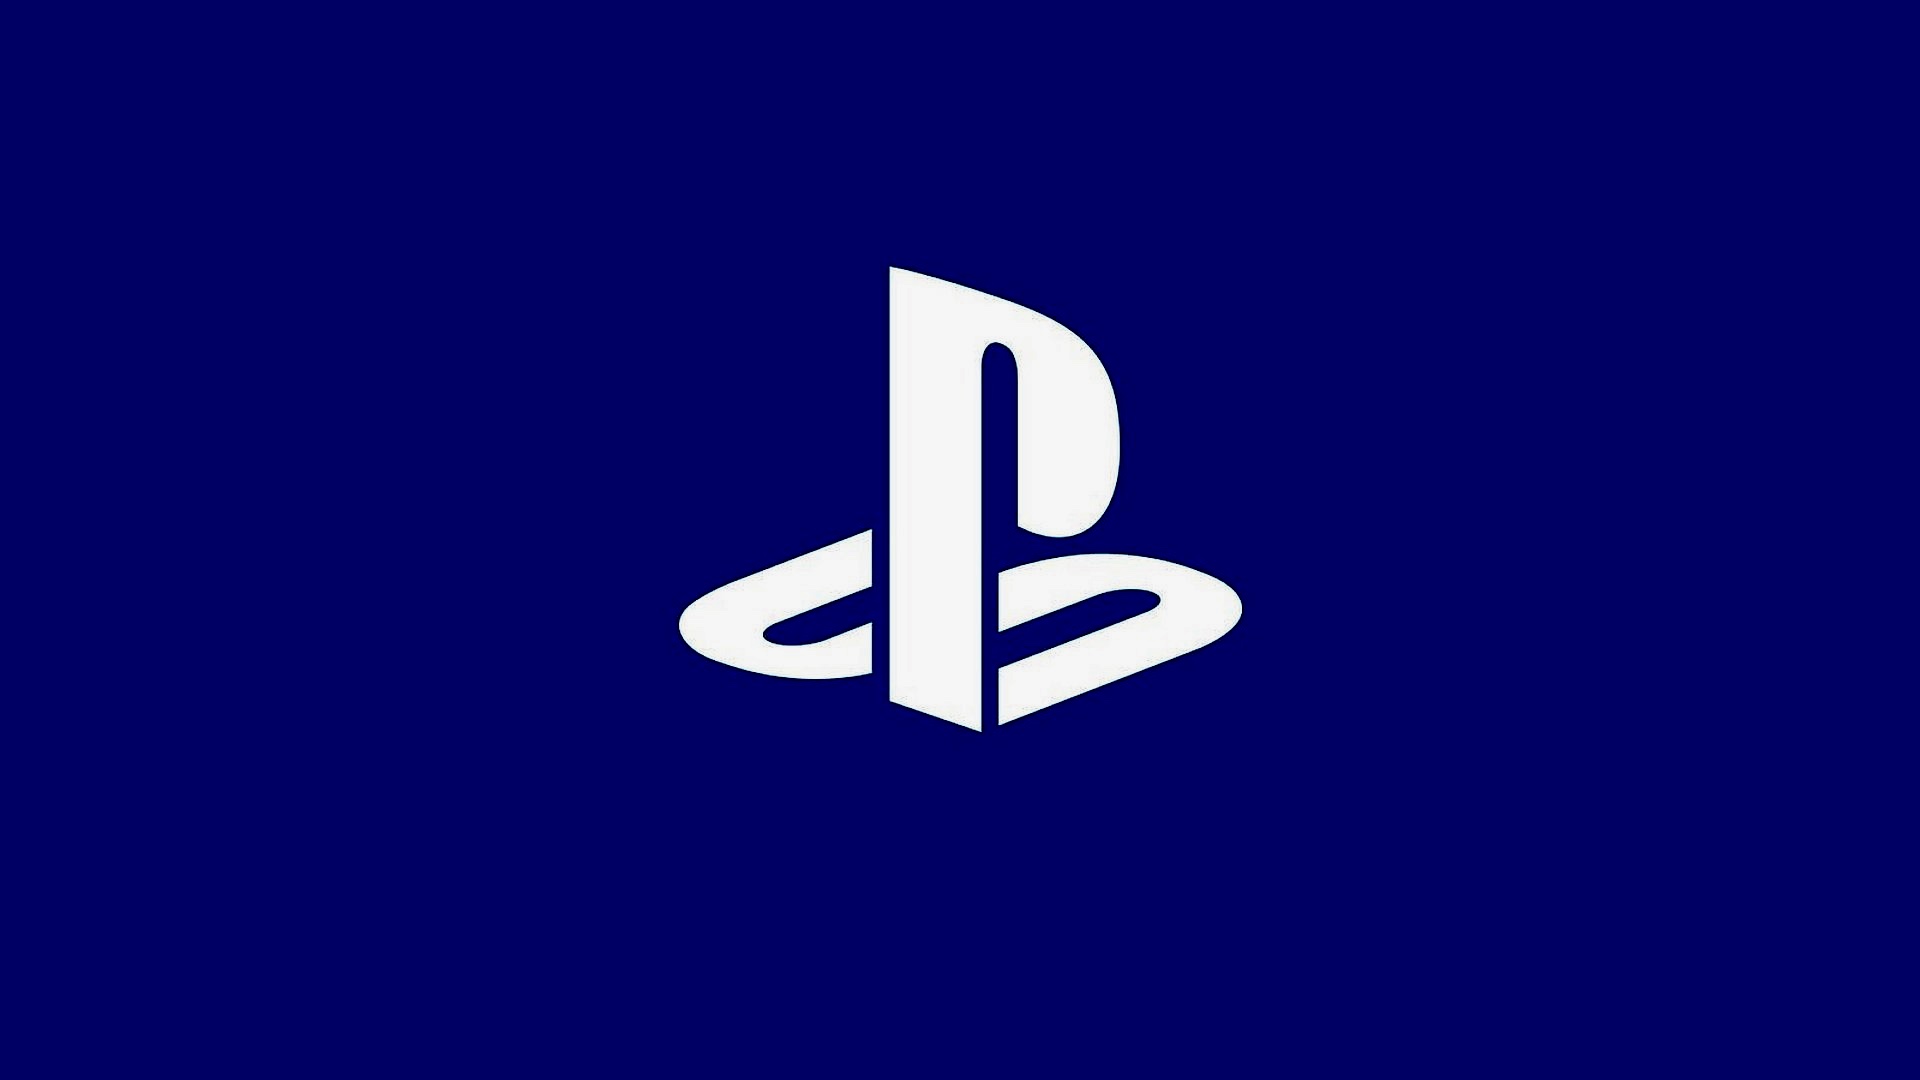 Sony Really Did Not Want Crossplay on PS4, Leaked Documents Show